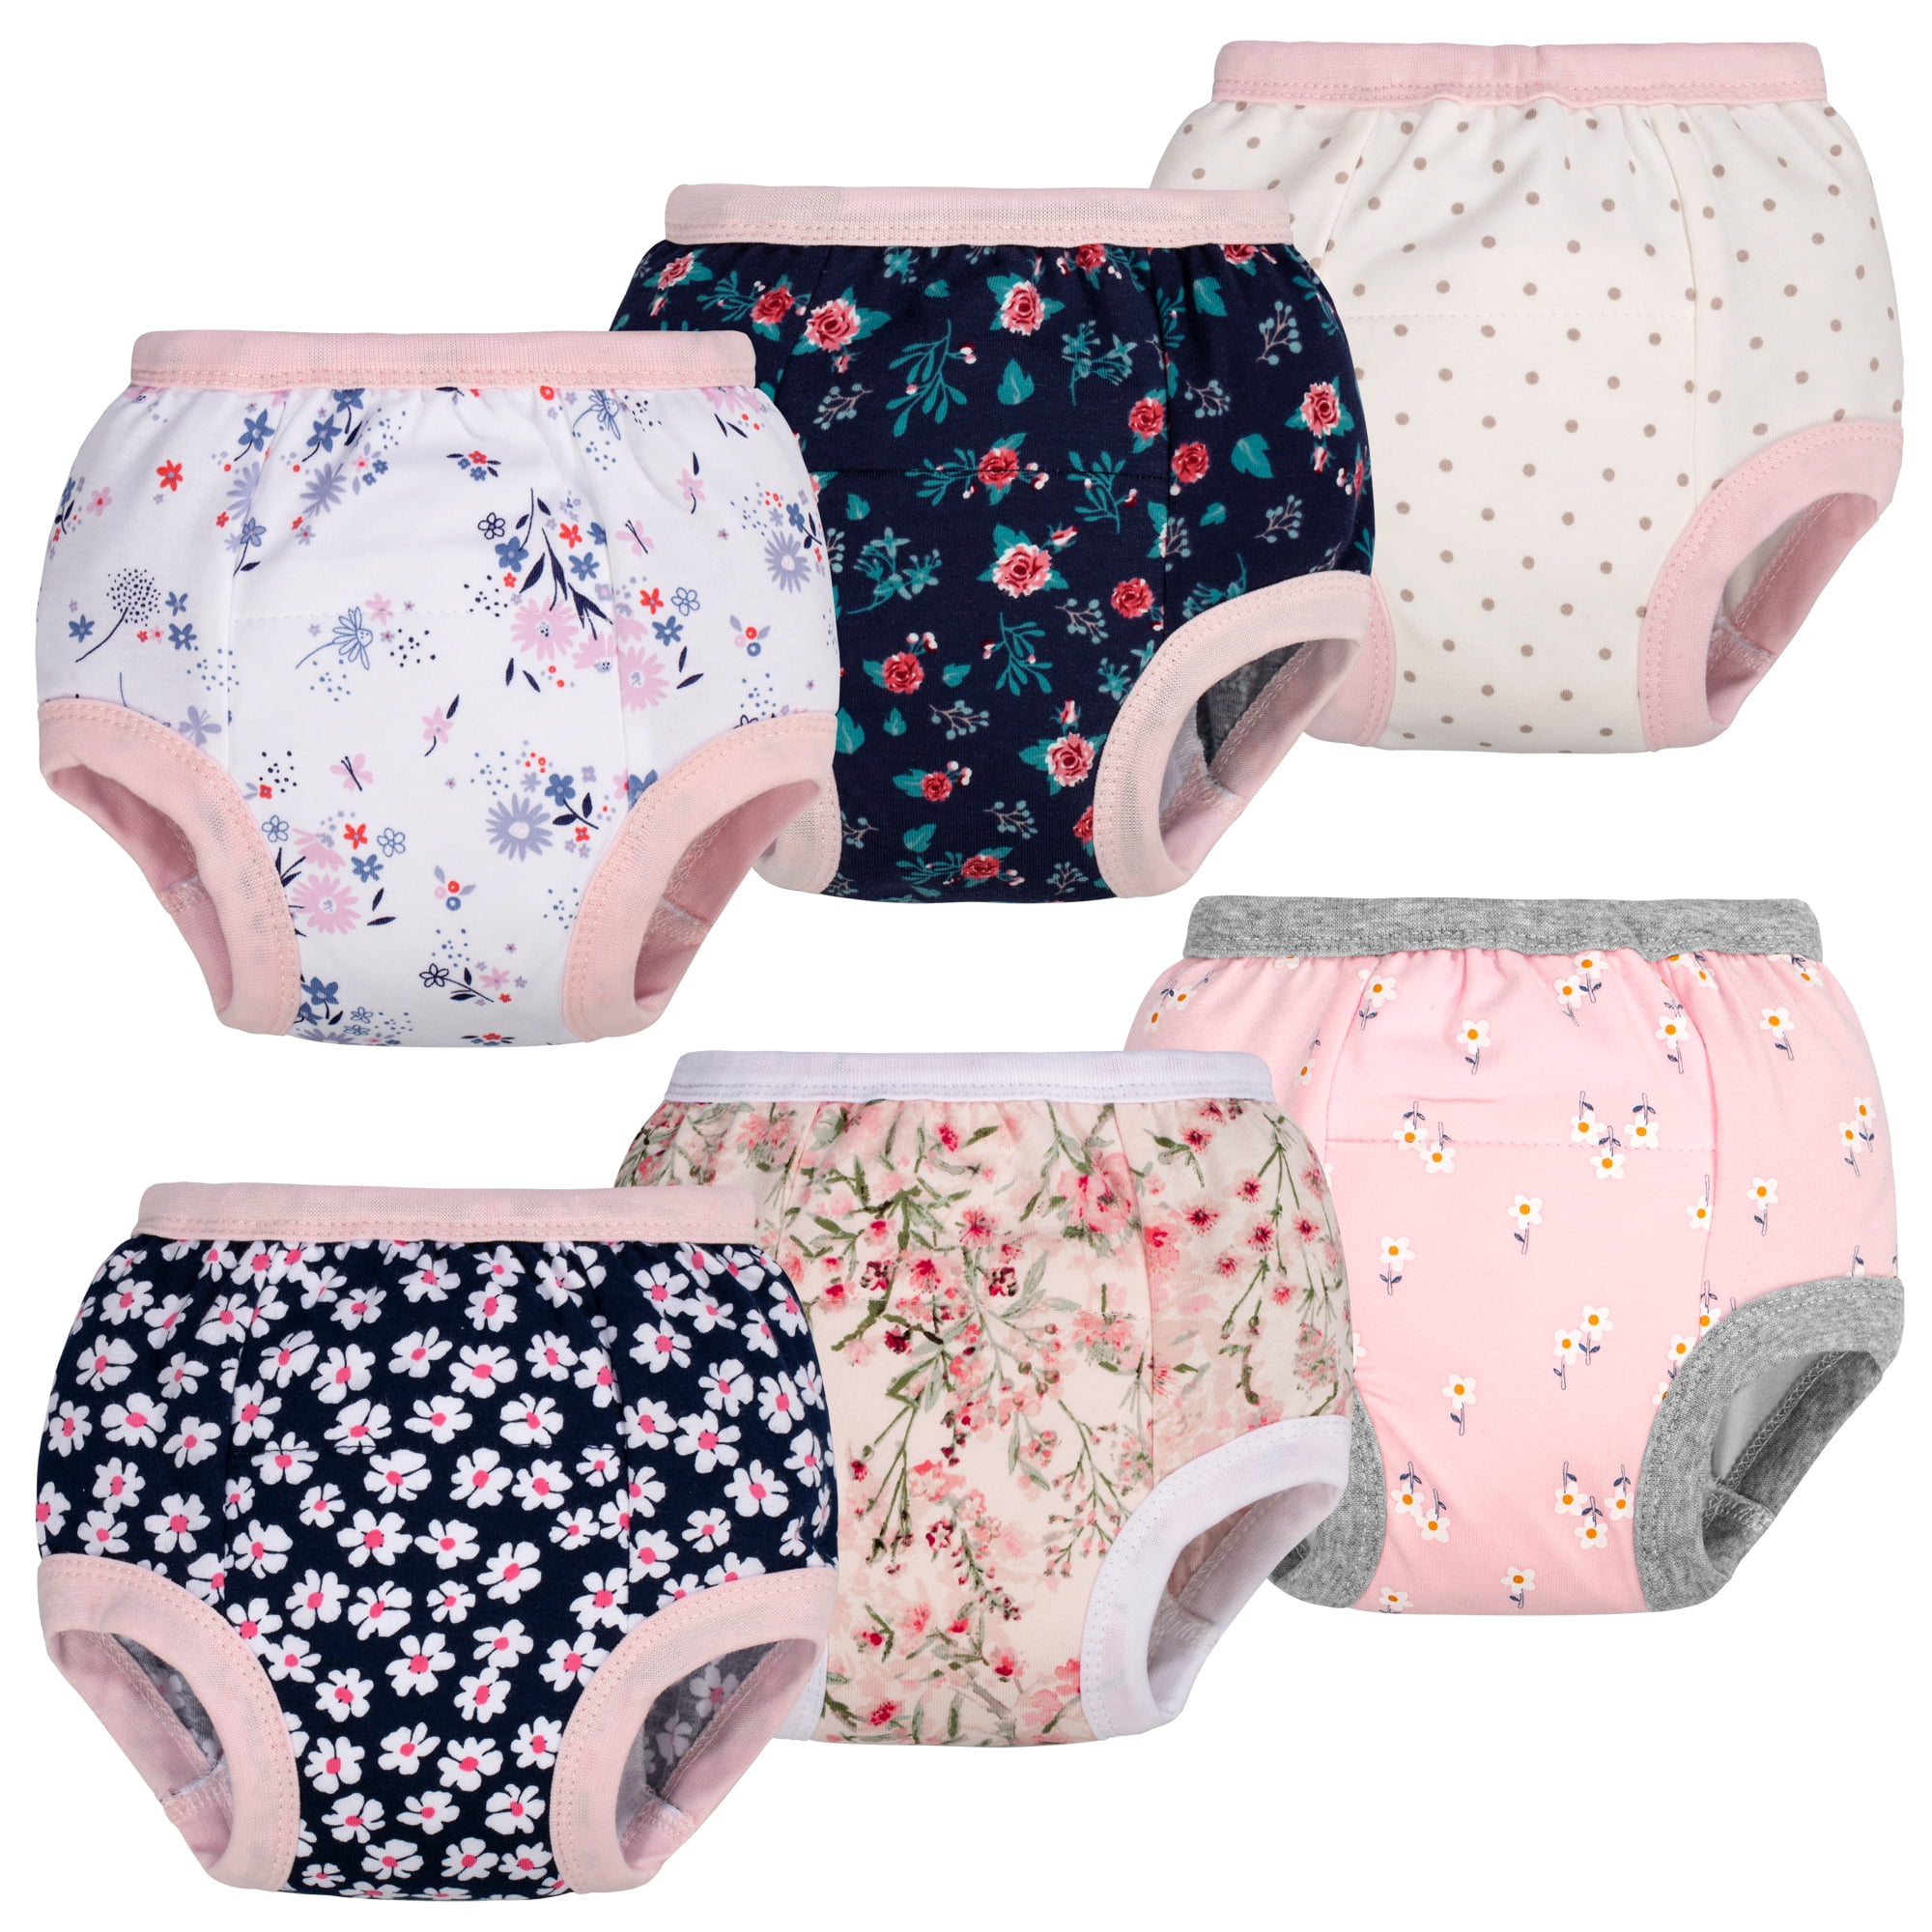  Yufanlili 8 Pack Potty Training Underwear,Cotton Toddler  Absorbent Training Pants,Toddlers Pee Training Diaper Underwear 3T-4T : Baby